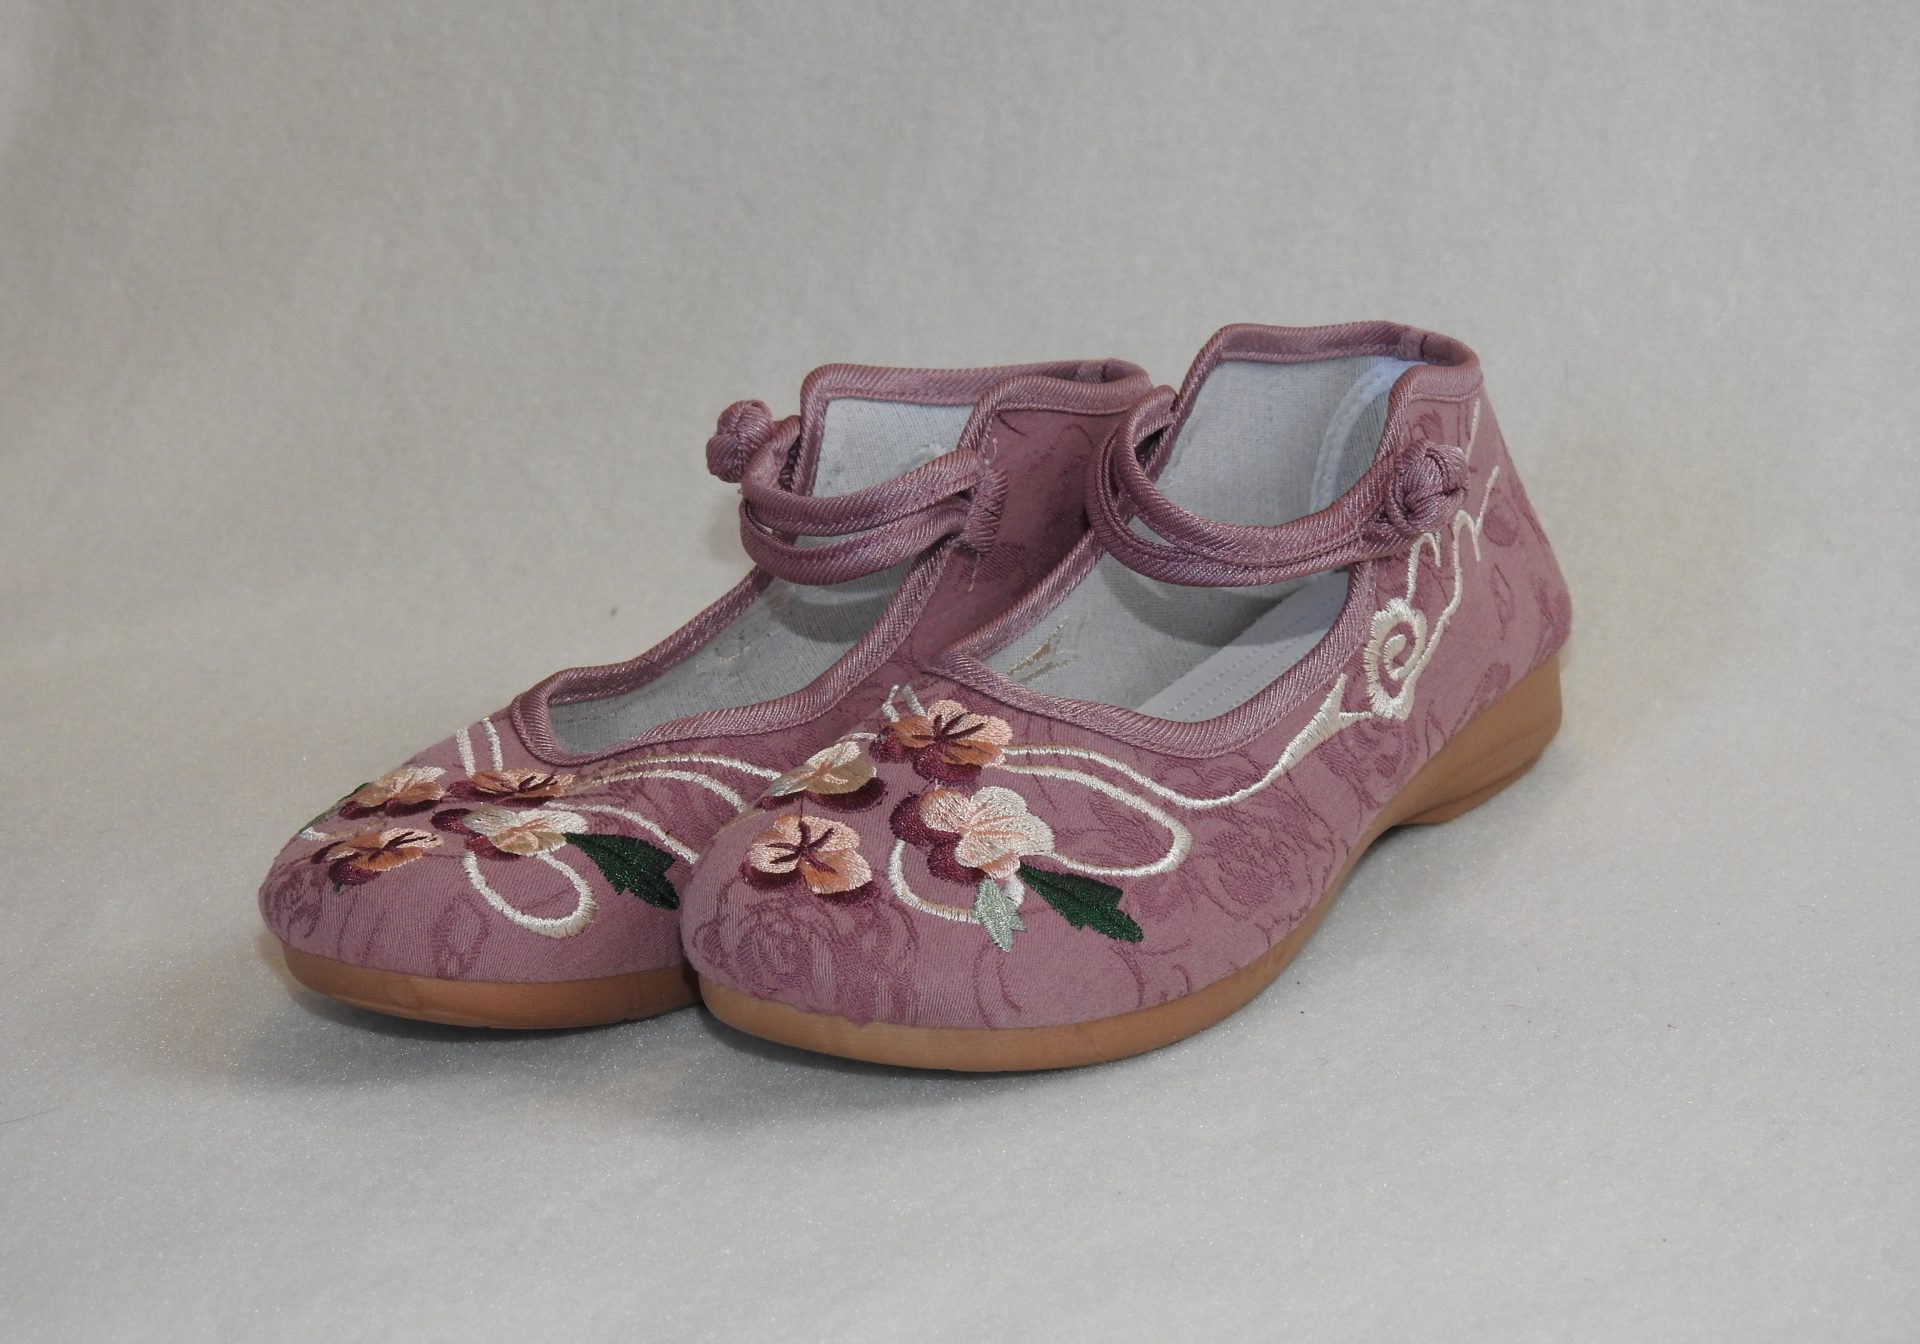 New Shoes, Ancient Traditions_Diana Hu_#241